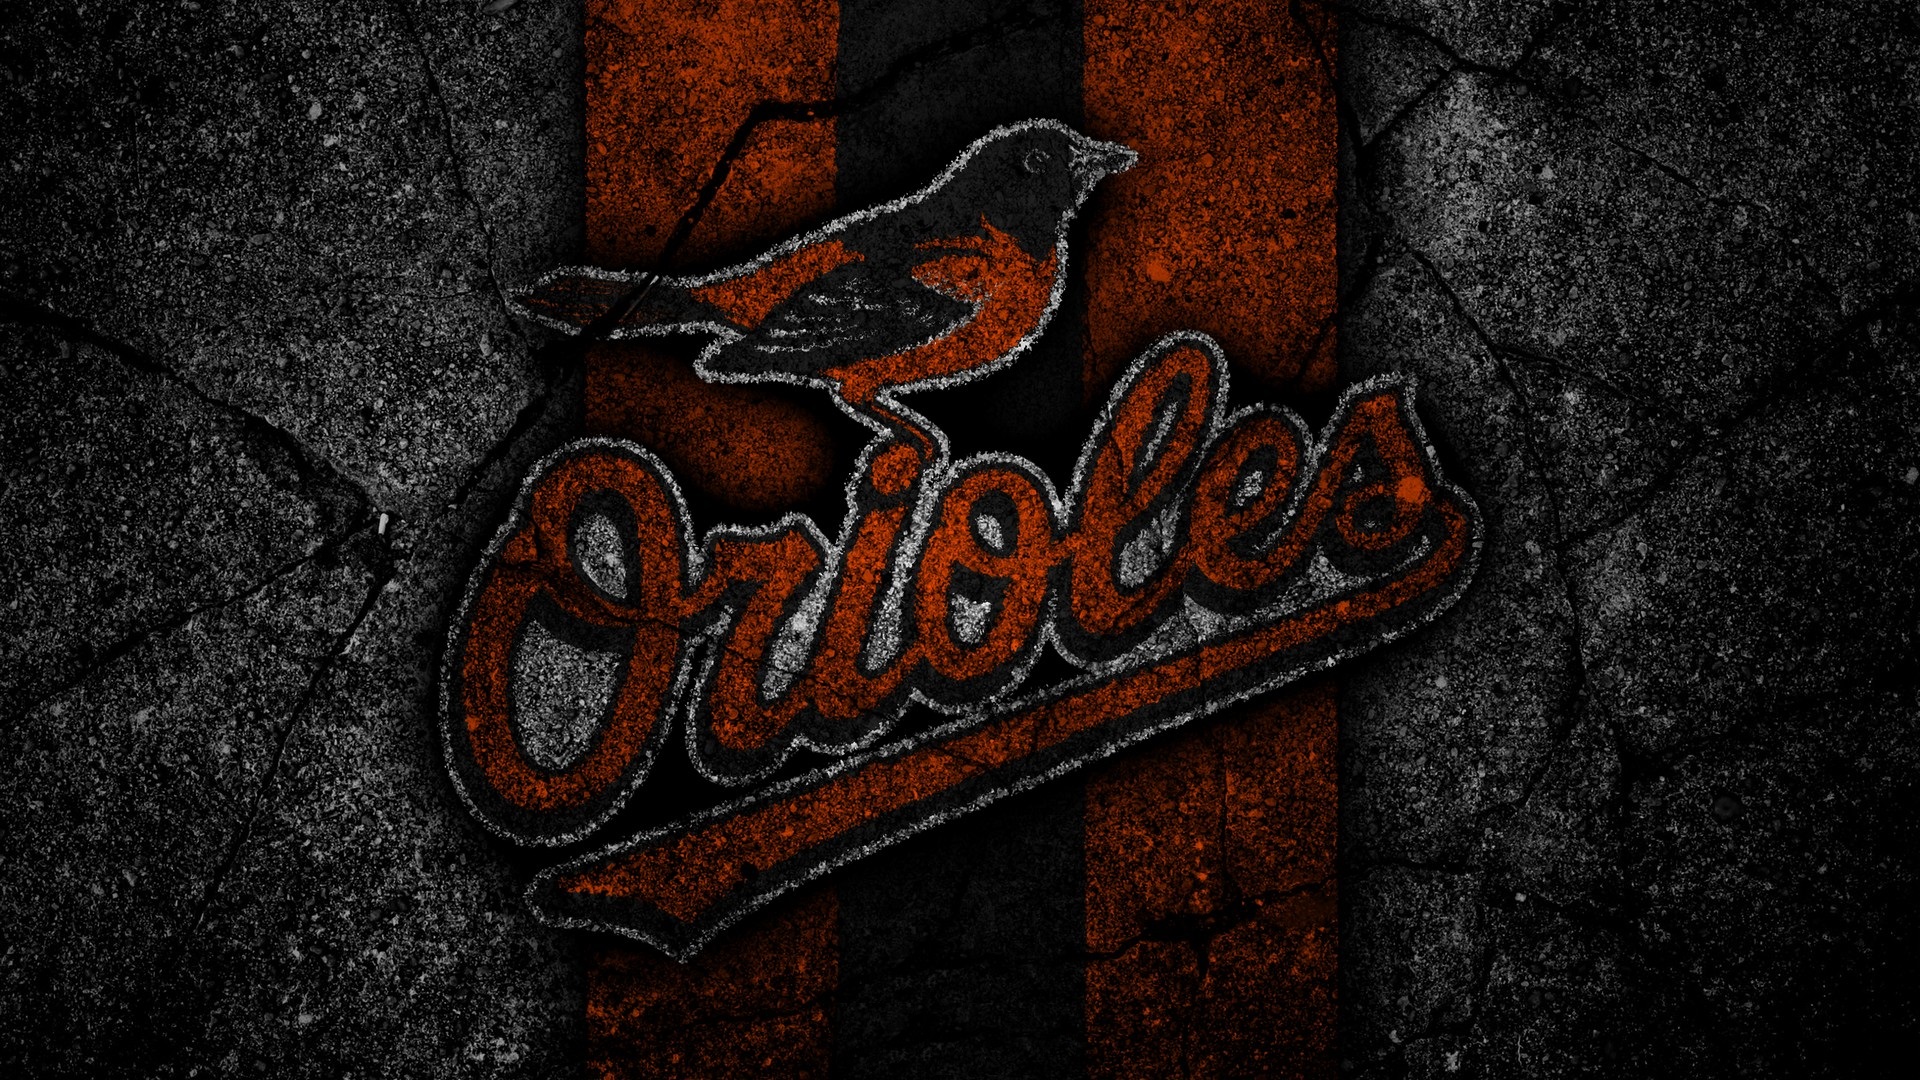 Baltimore Orioles Wallpaper HD With high-resolution 1920X1080 pixel. You can use this wallpaper for Mac Desktop Wallpaper, Laptop Screensavers, Android Wallpapers, Tablet or iPhone Home Screen and another mobile phone device